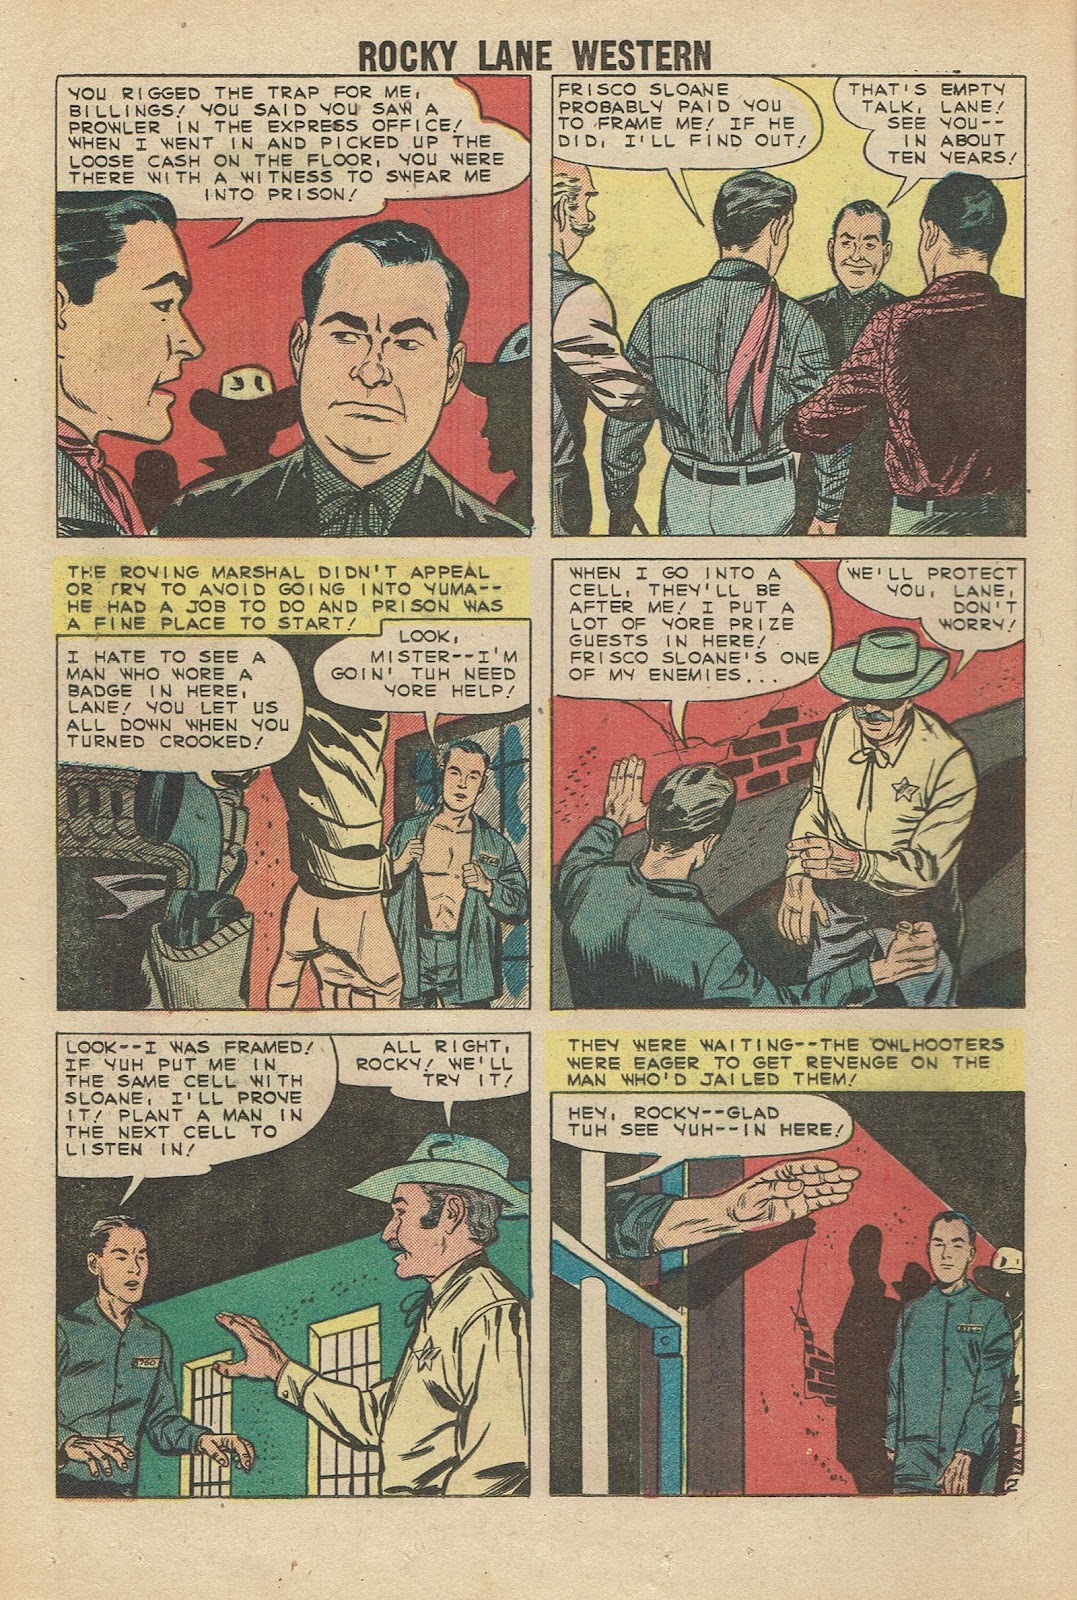 Rocky Lane Western (1954) issue 85 - Page 16